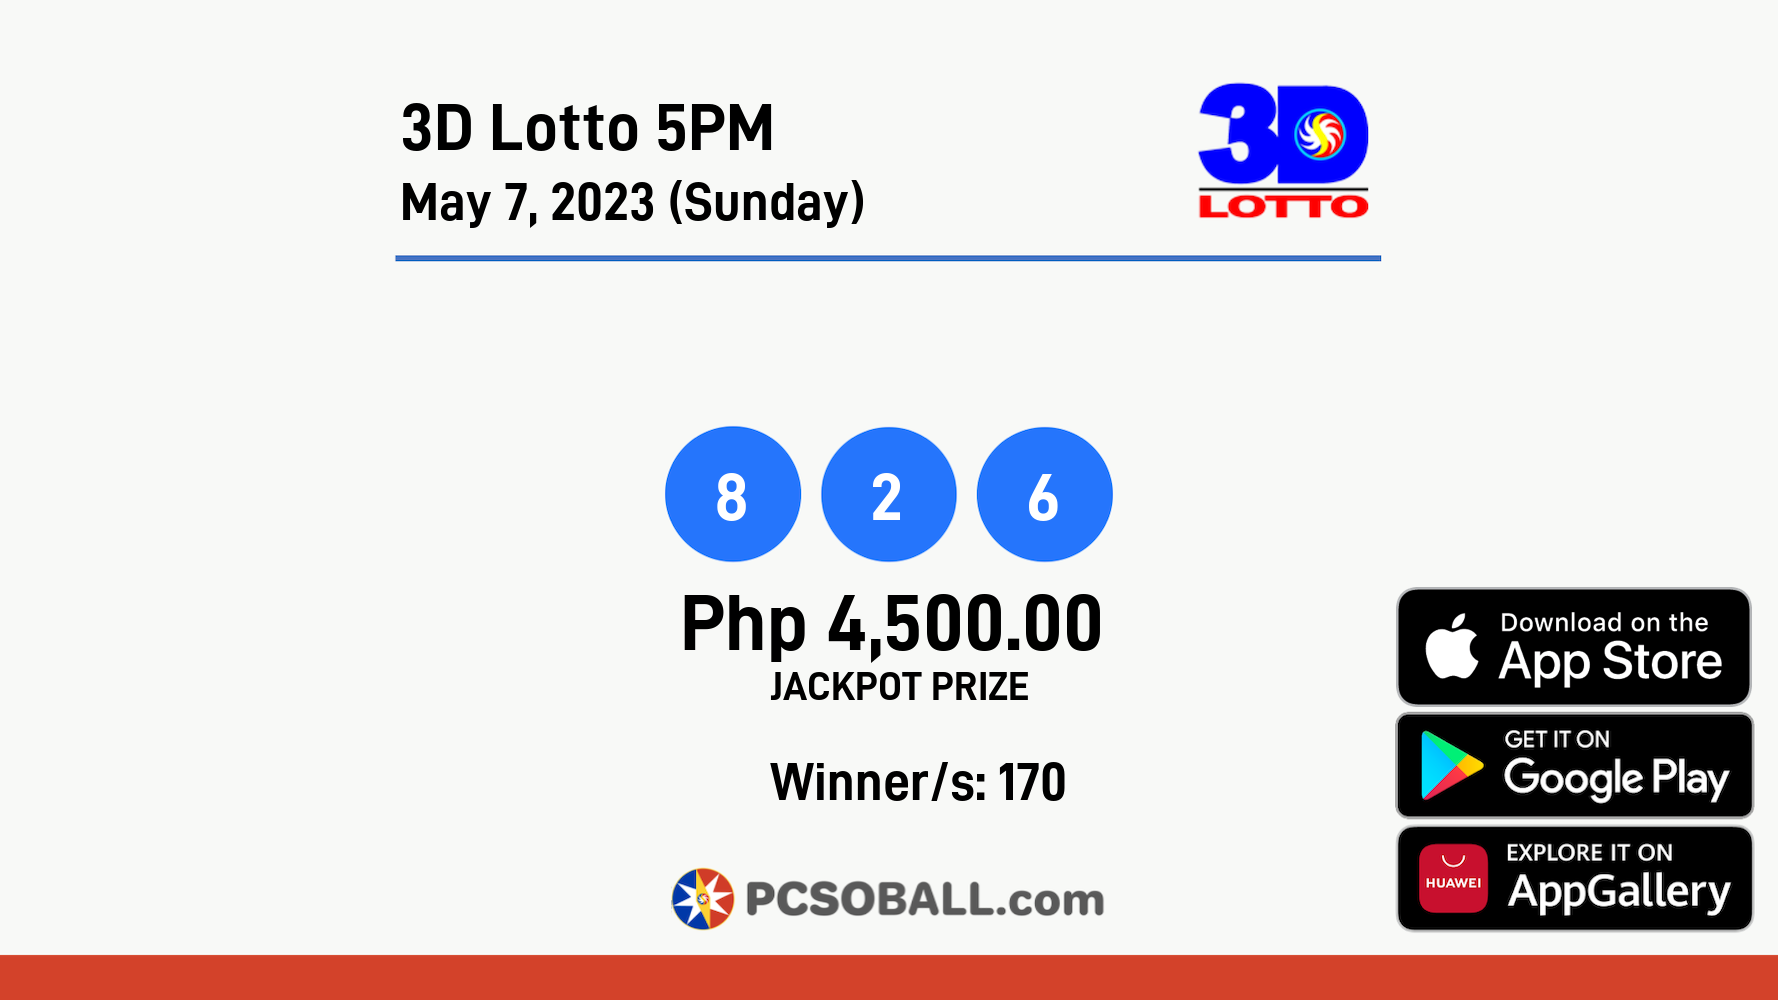 3D Lotto 5PM May 7, 2023 (Sunday) Result